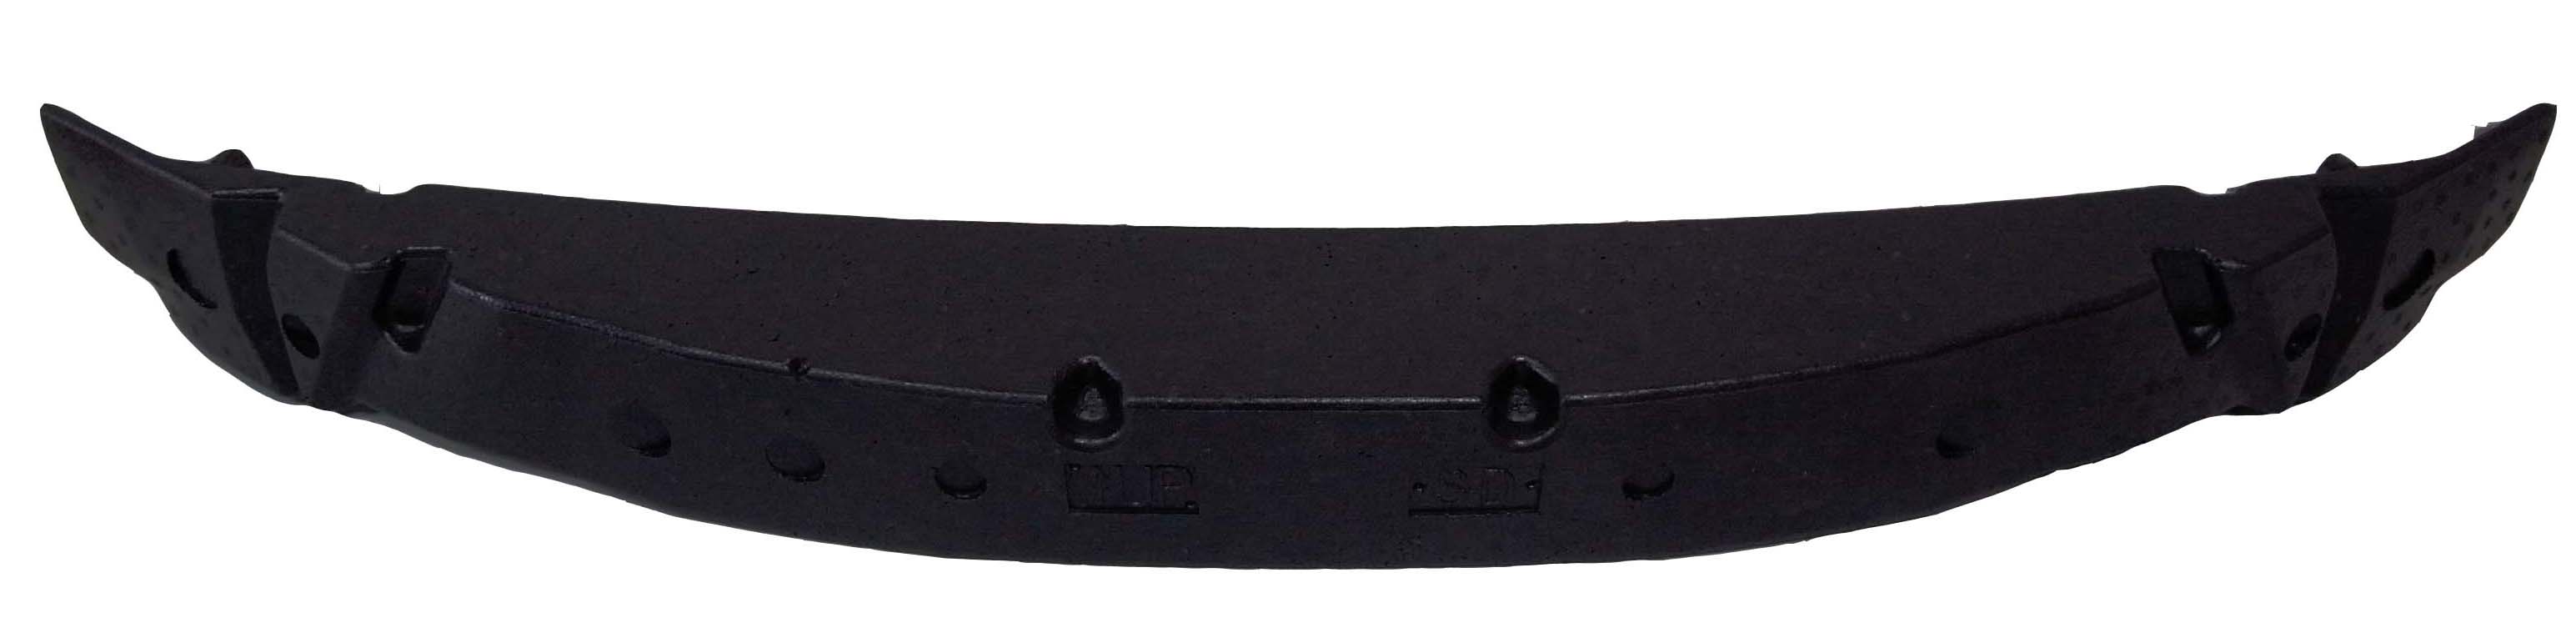 Aftermarket ENERGY ABSORBERS for TOYOTA - COROLLA, COROLLA,14-16,Front bumper energy absorber